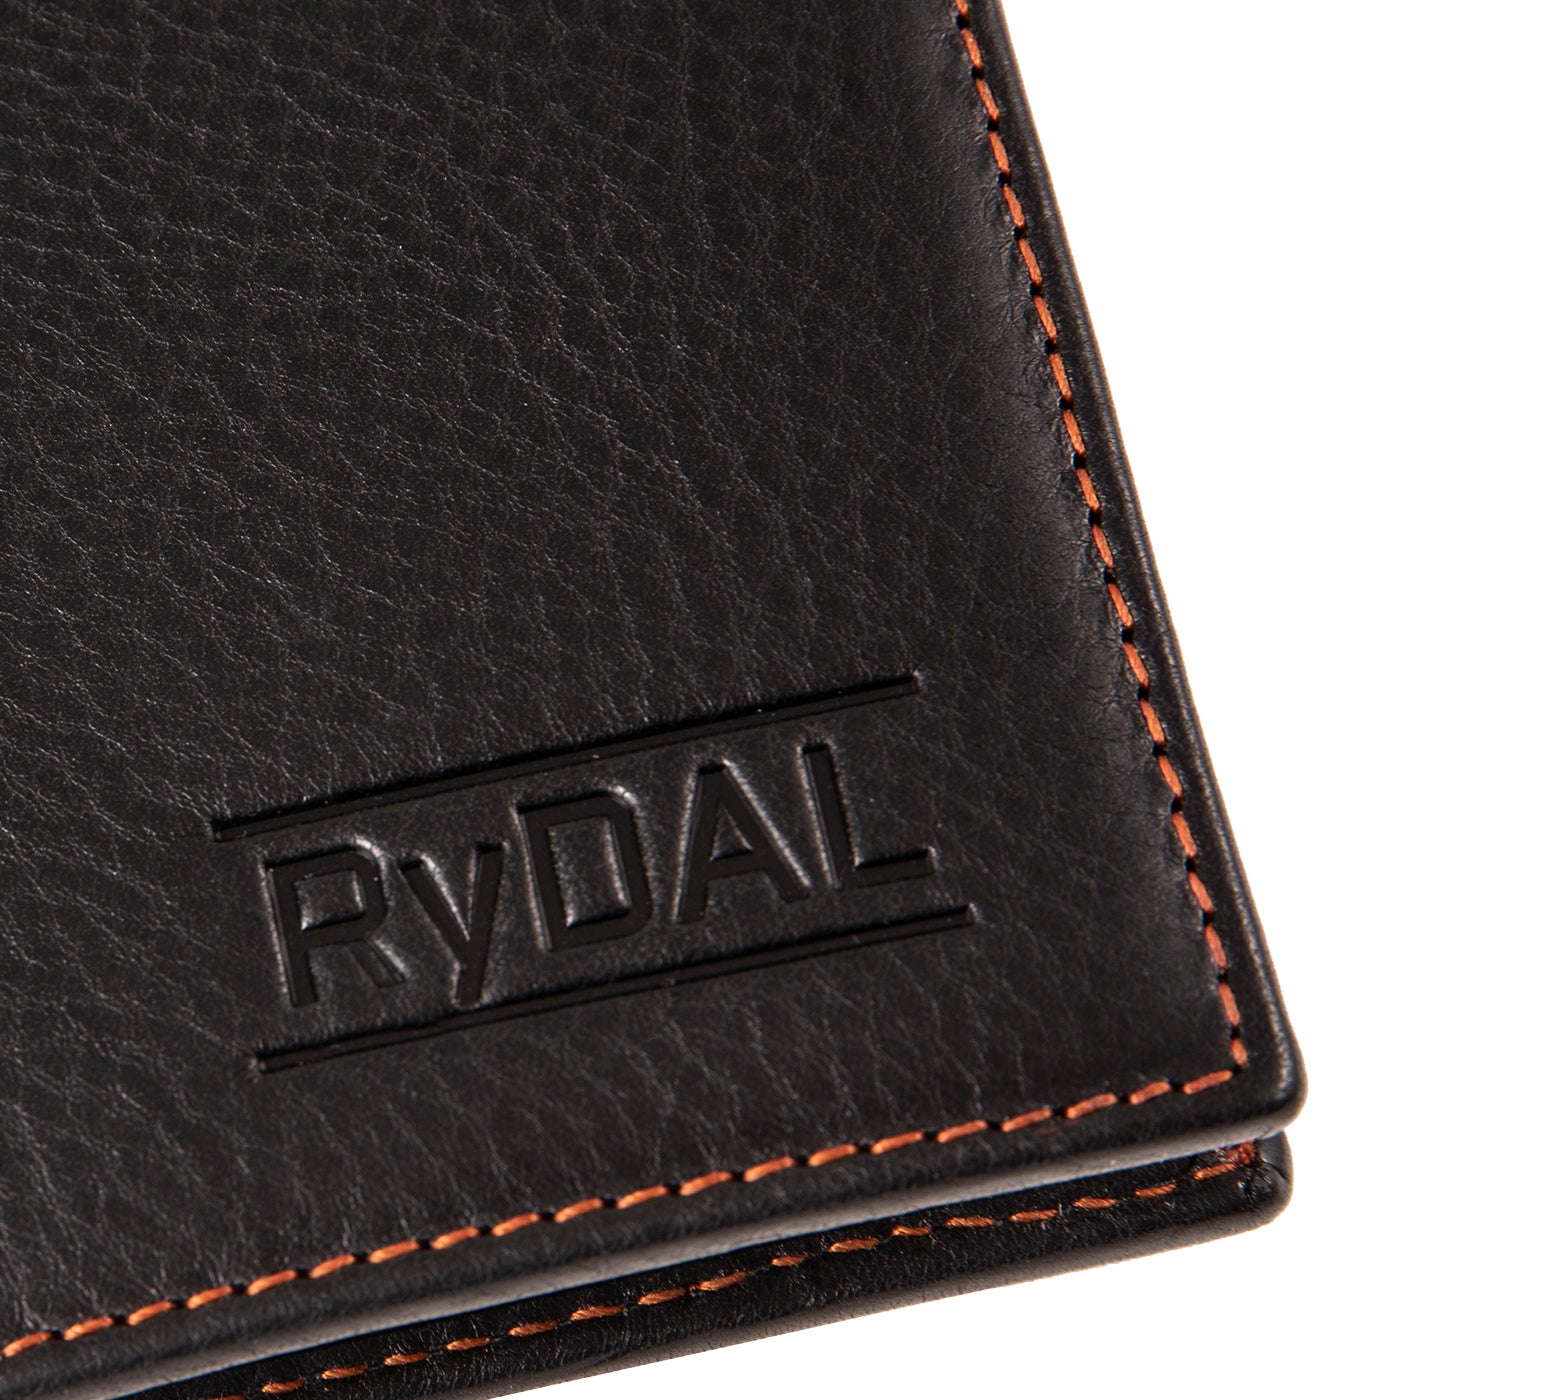 Mens Leather Wallet with Coin Pocket from Rydal in 'Black/Rust' showing close up of logo.